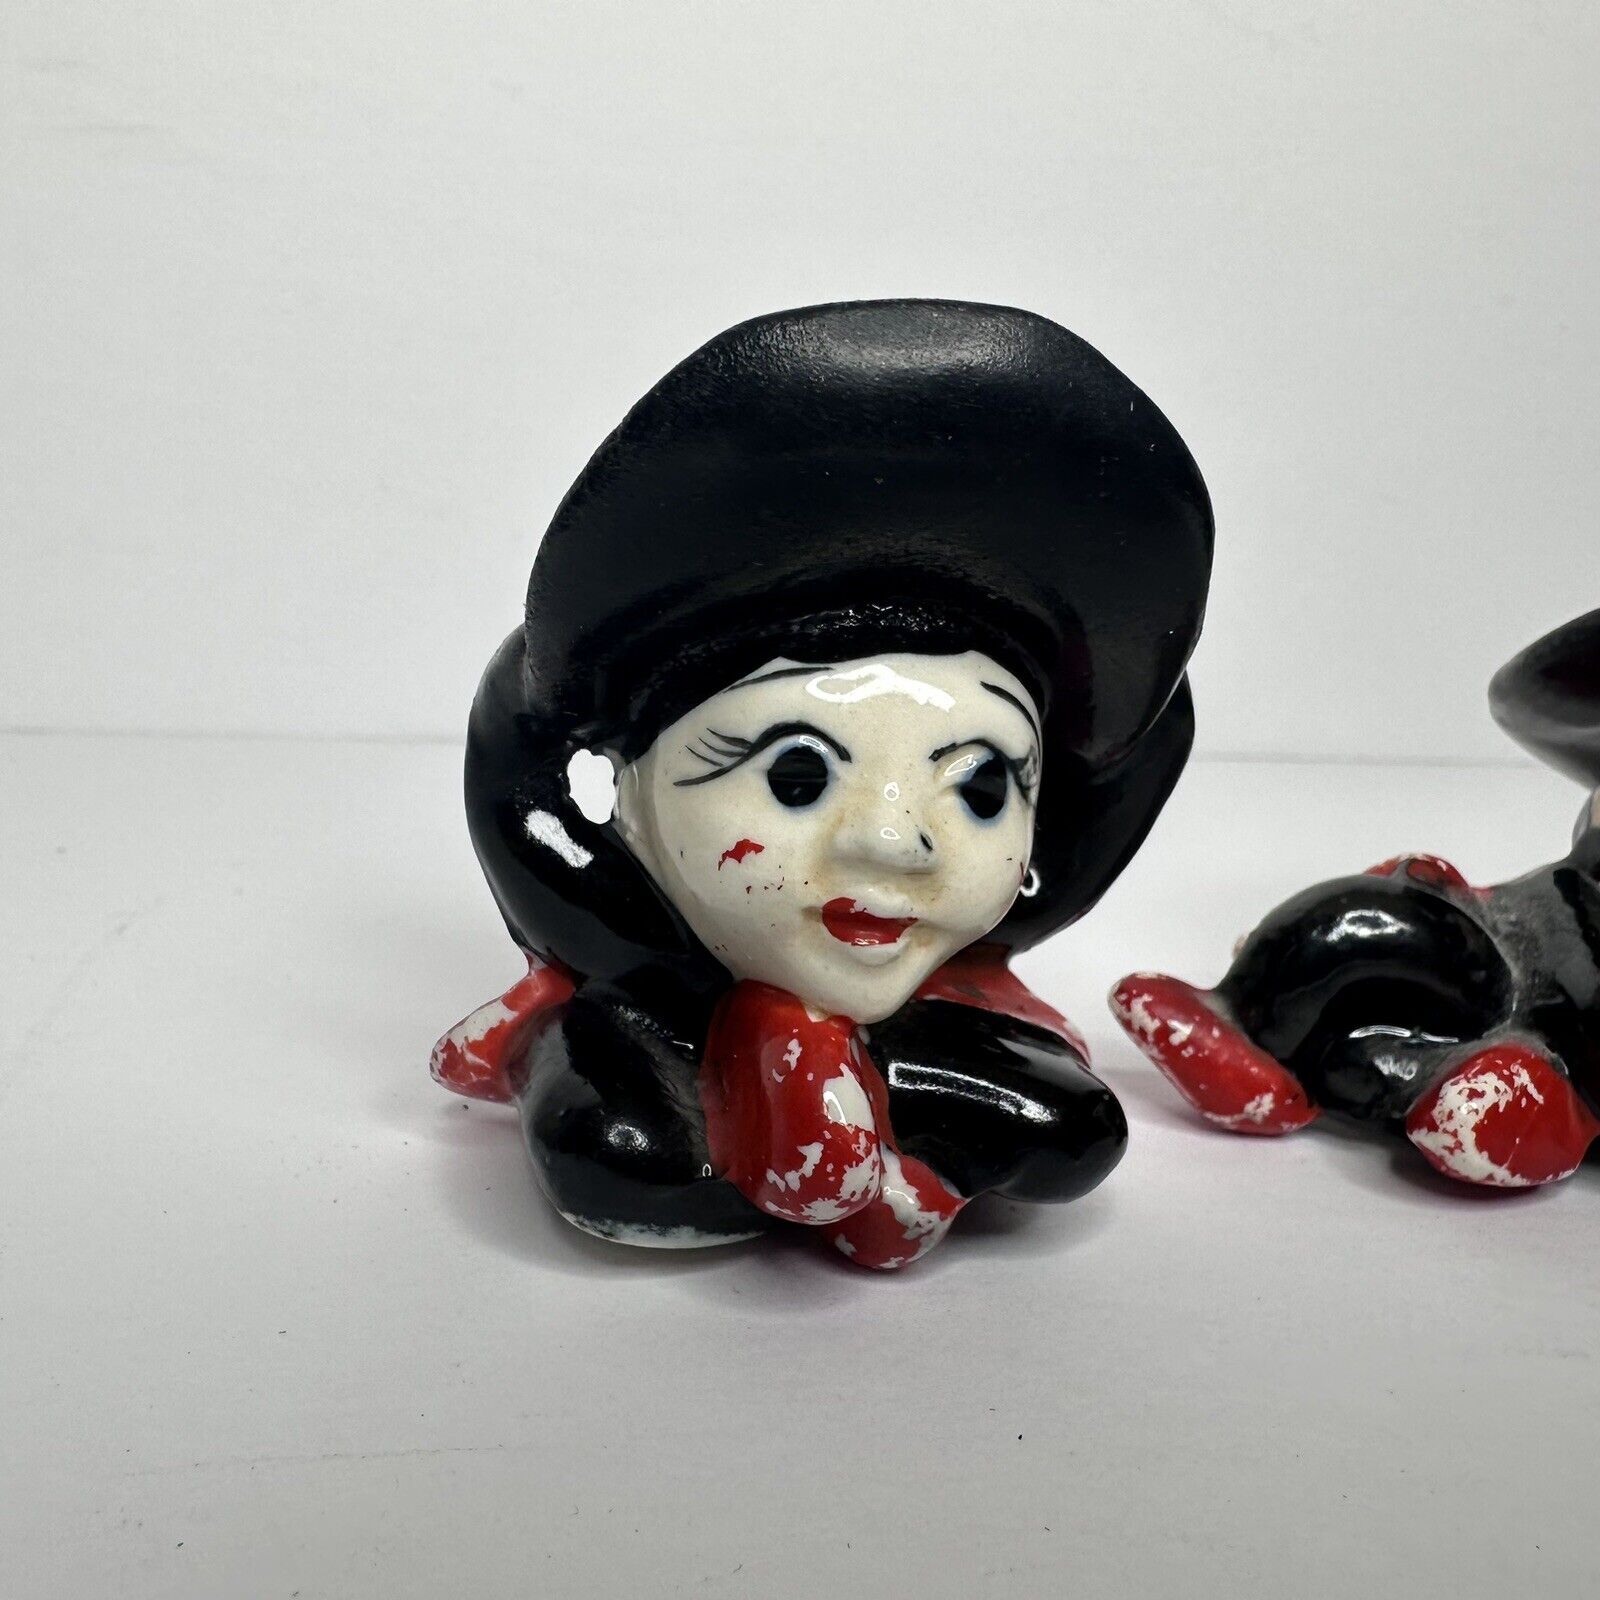 Rare Vintage 1960s Witches Salt & Pepper Shaker Set - Made in Occupied Japan - Halloween Decor - TreasuTiques